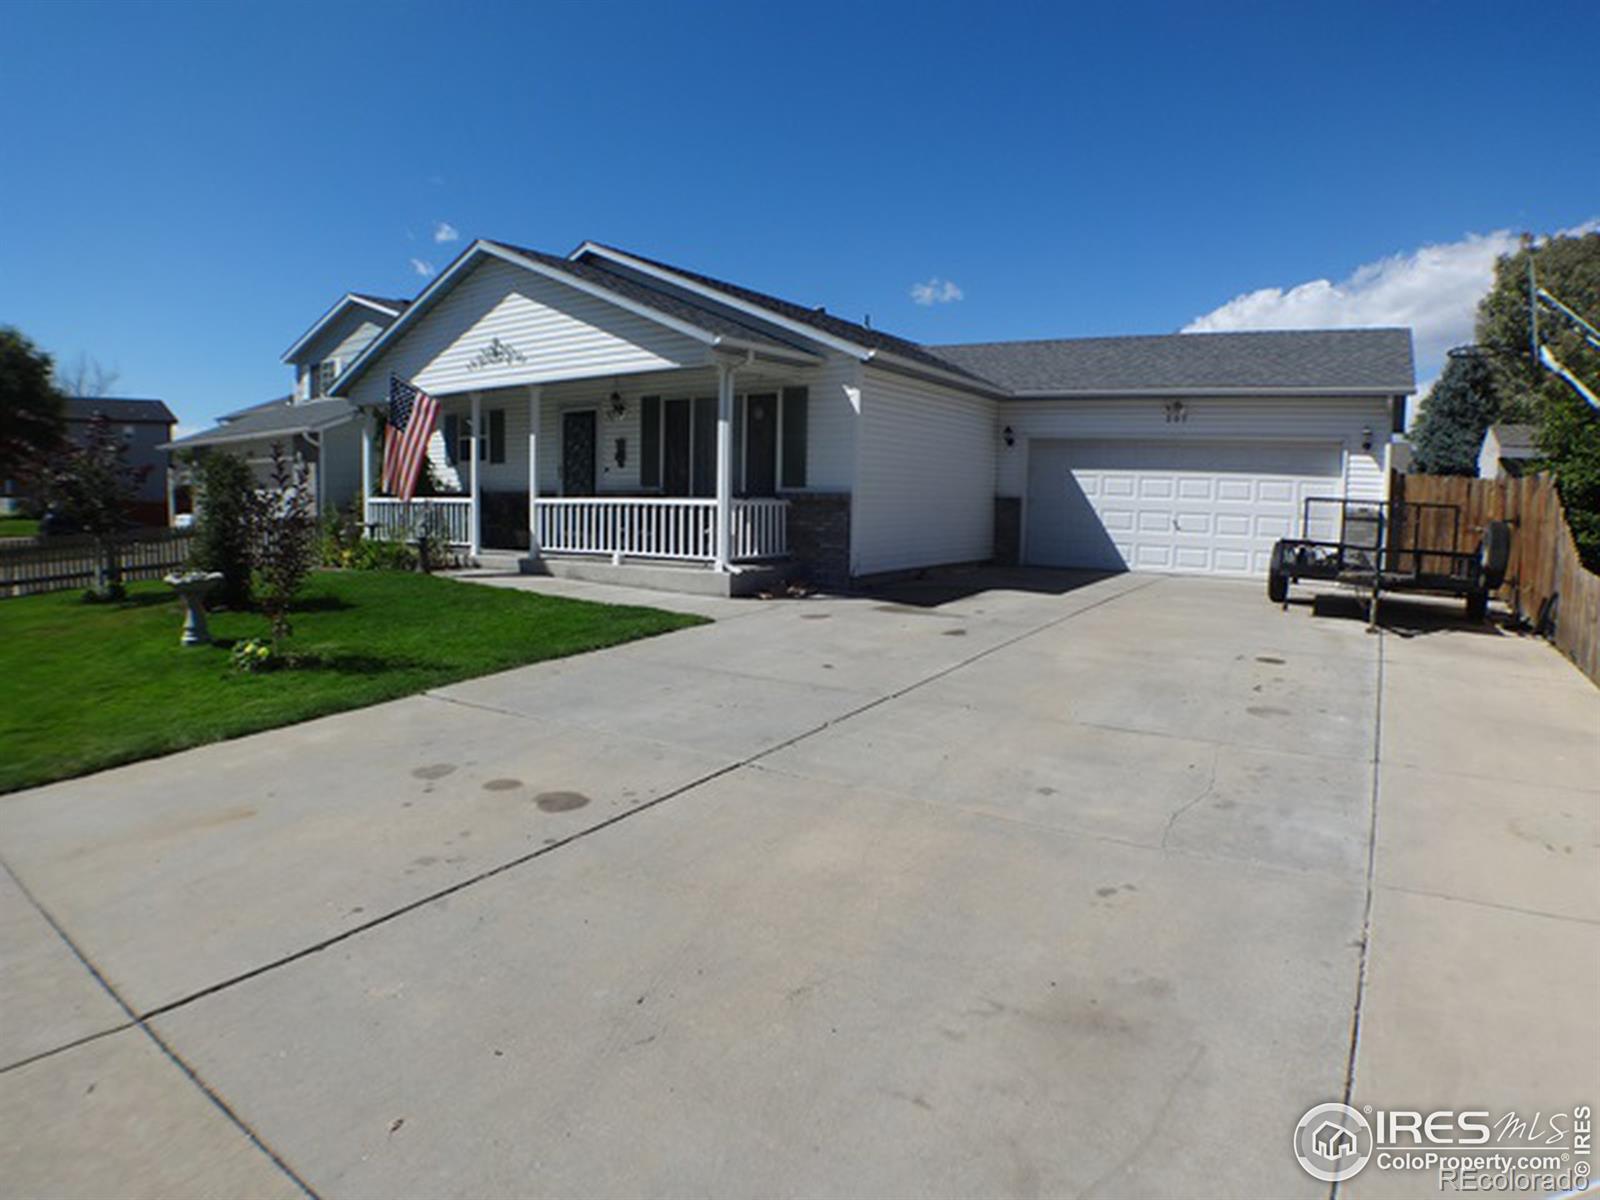 207 49th, Greeley, CO